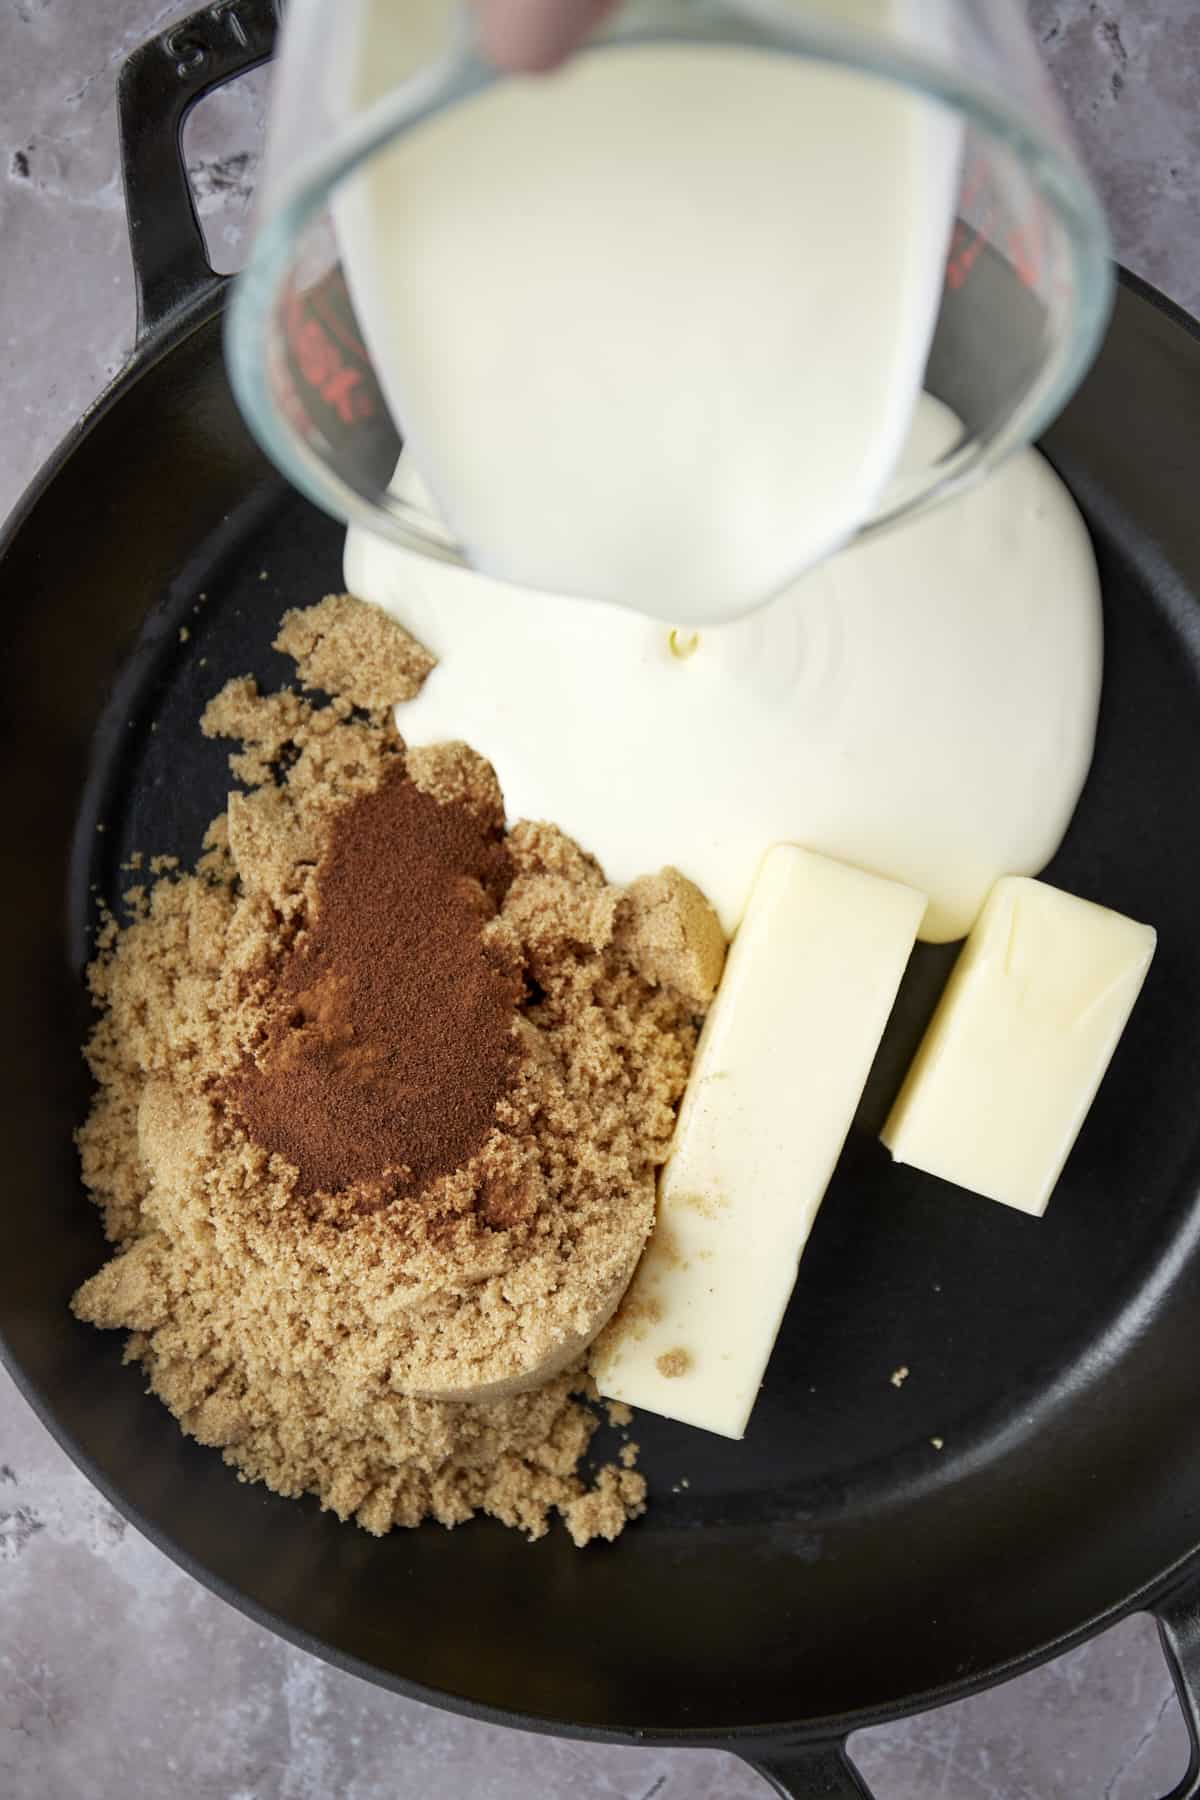 brown sugar, a stick and a half of butter, cinnamon, and heavy cream being poured into a skillet